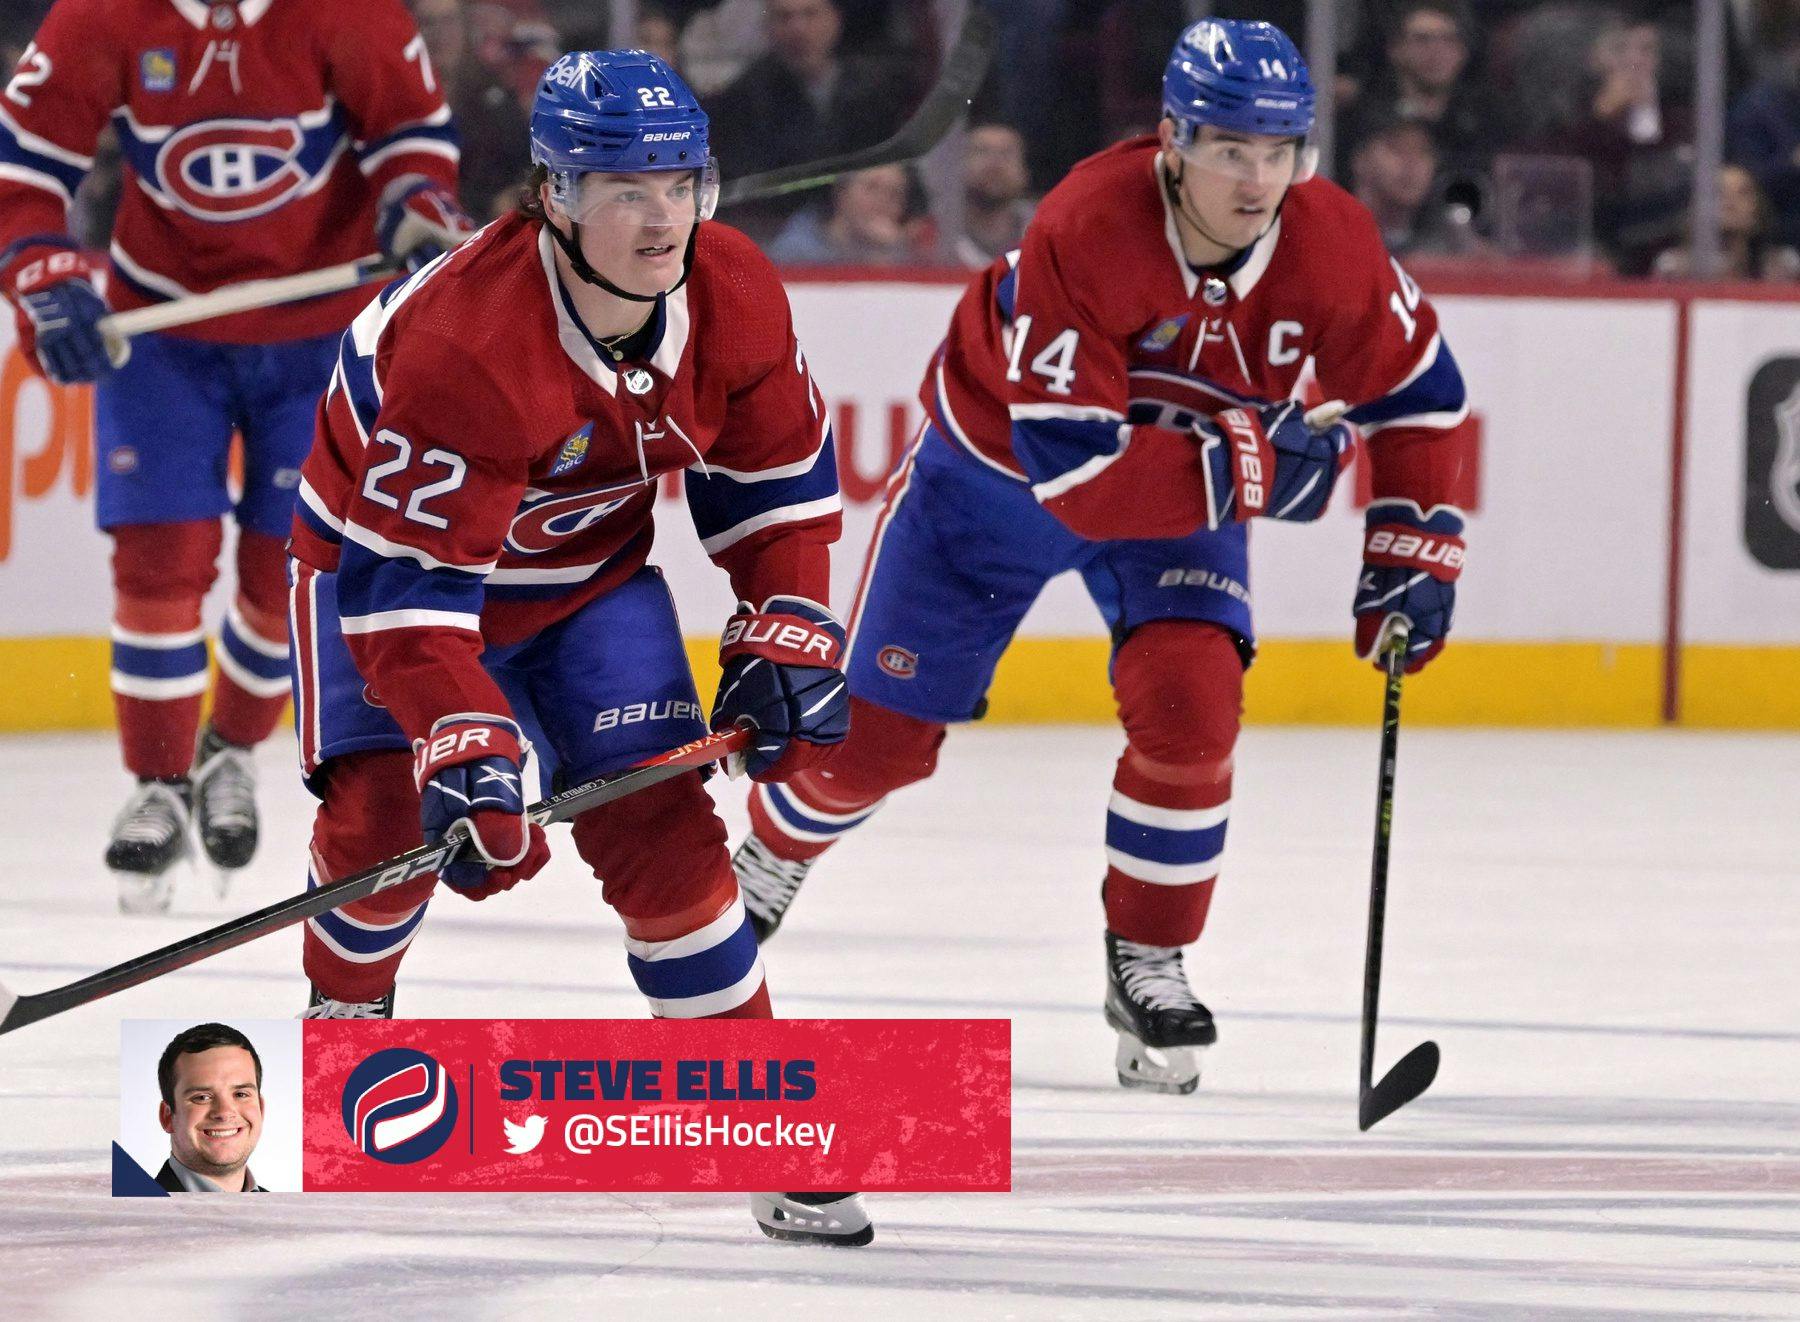 The young stars are making the Montreal Canadiens fun, even if the results aren’t